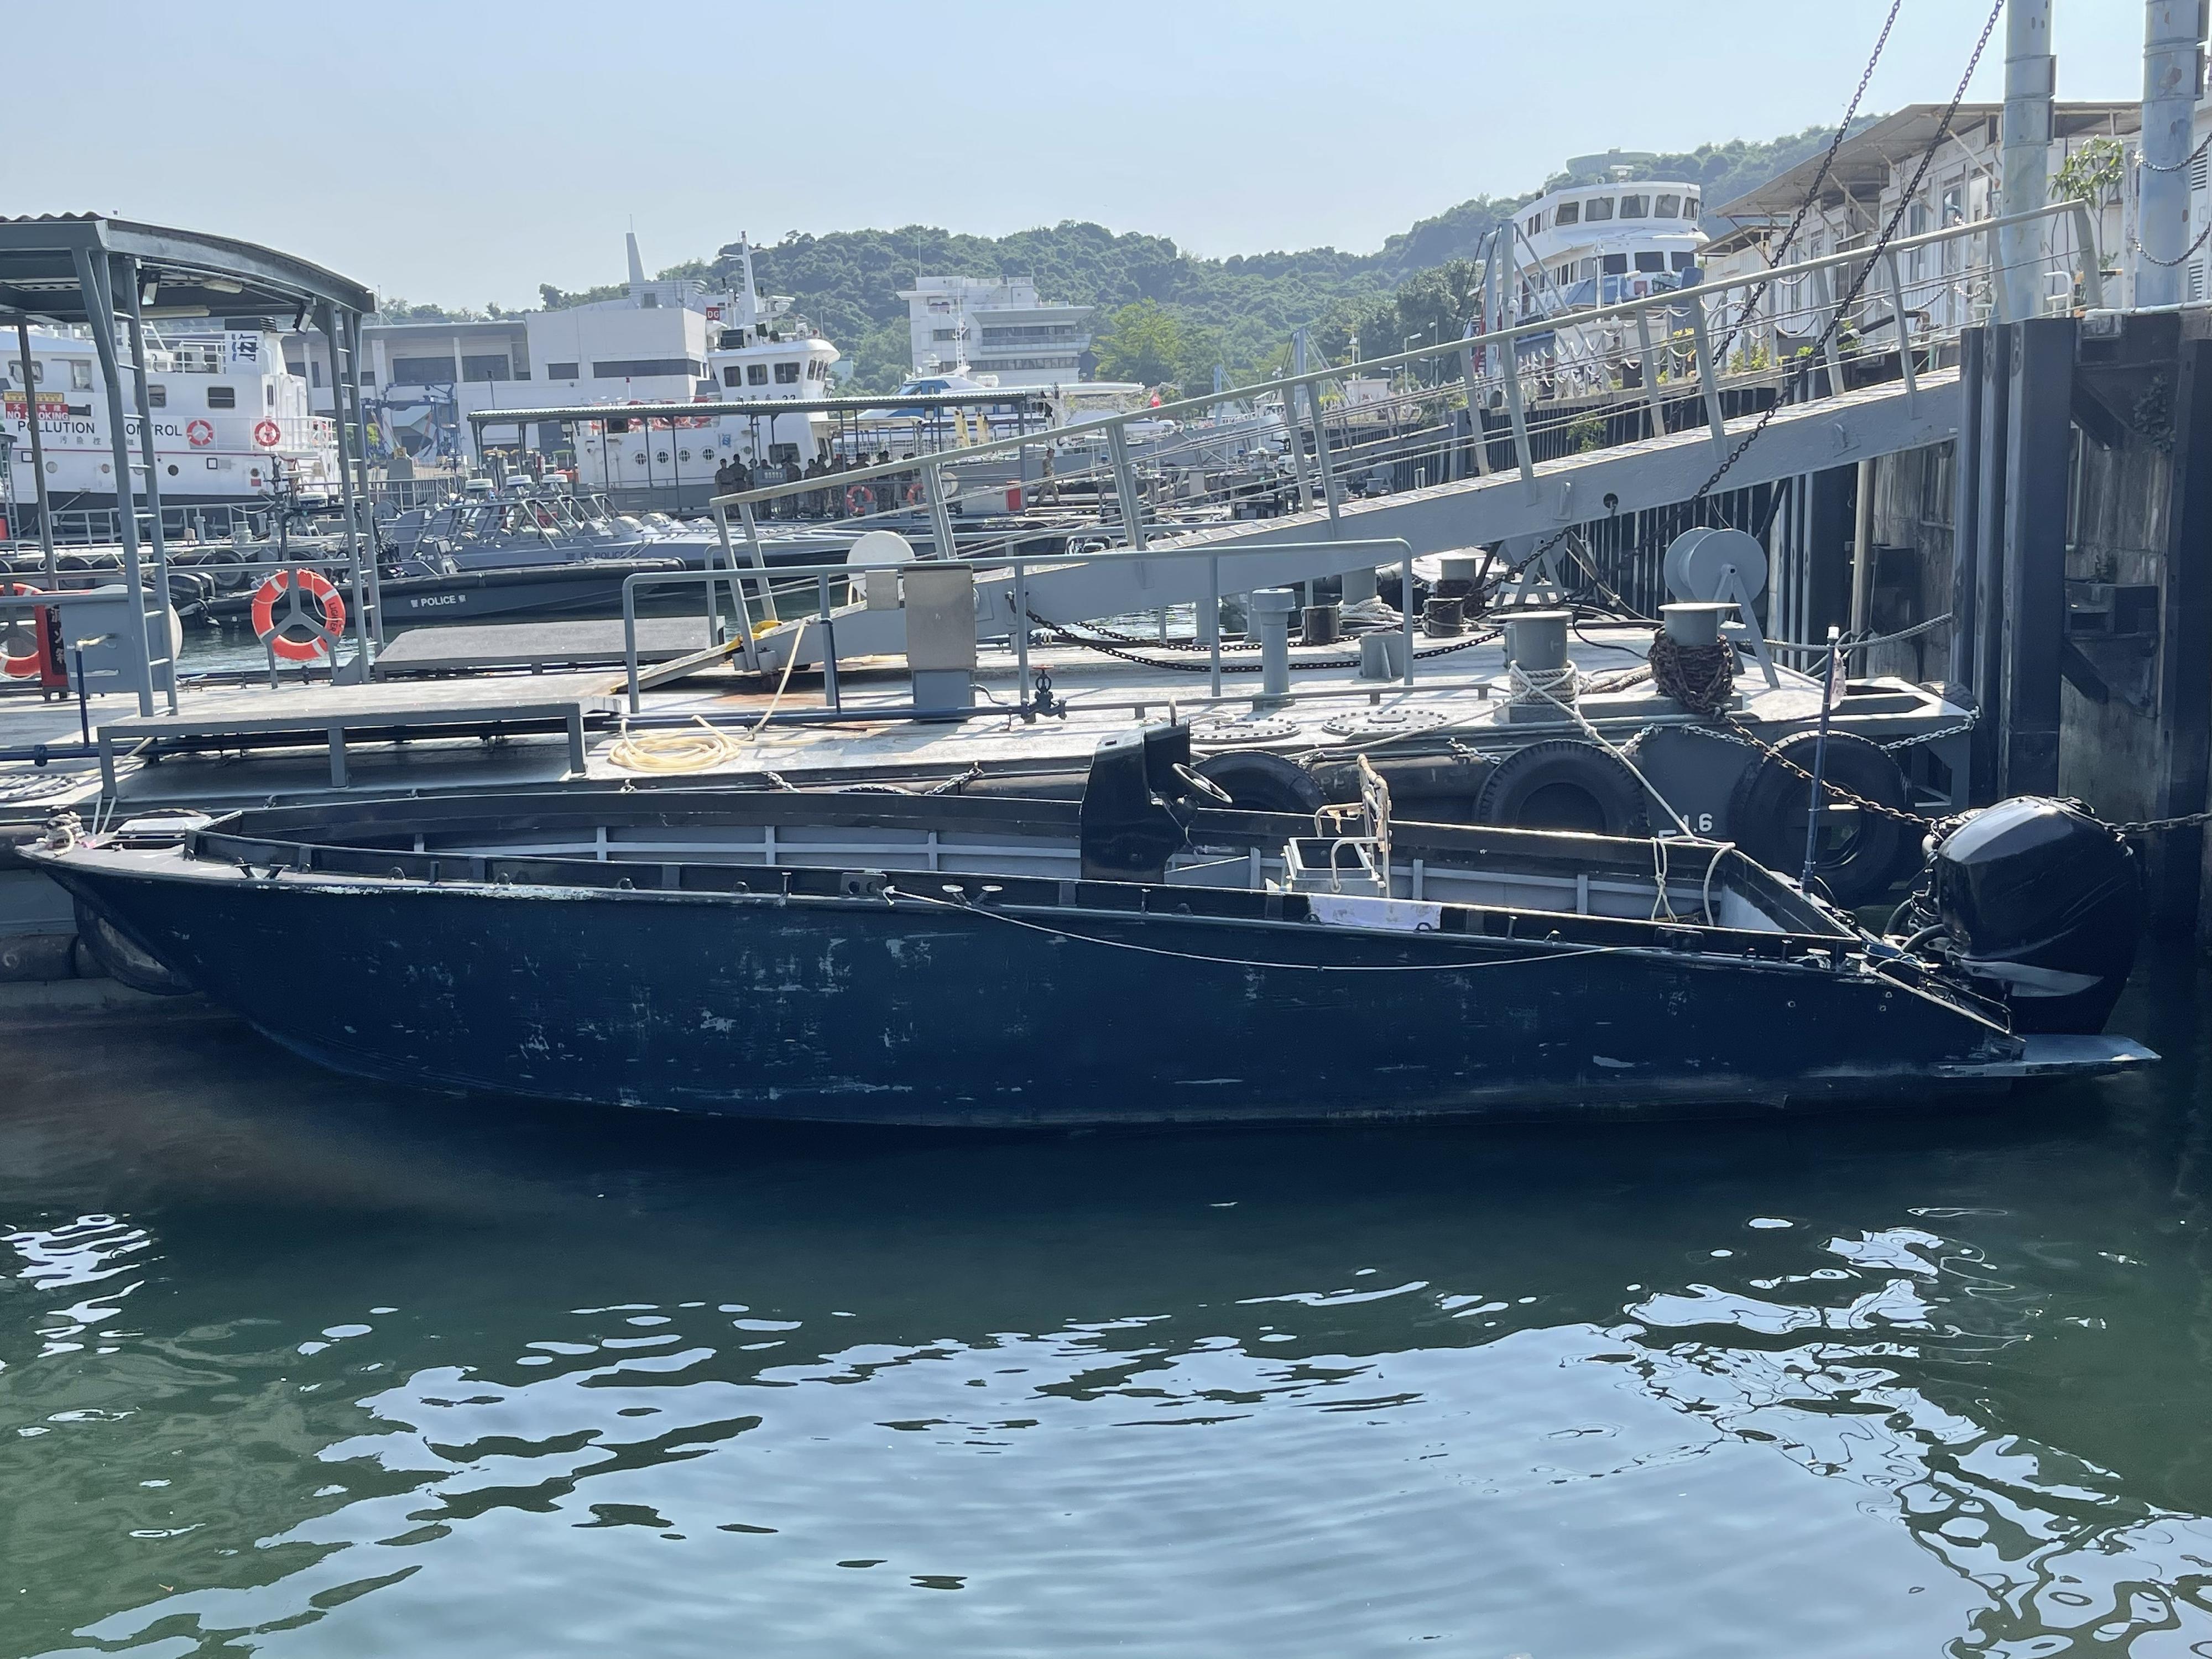 Hong Kong Customs yesterday (September 13) mounted an anti-smuggling operation in the eastern waters of Hong Kong and detected a suspected smuggling case involving speedboats. A batch of suspected smuggled goods with an estimated market value of about $800,000 was seized. Photo shows the speedboat suspected to have been used to smuggle goods.


